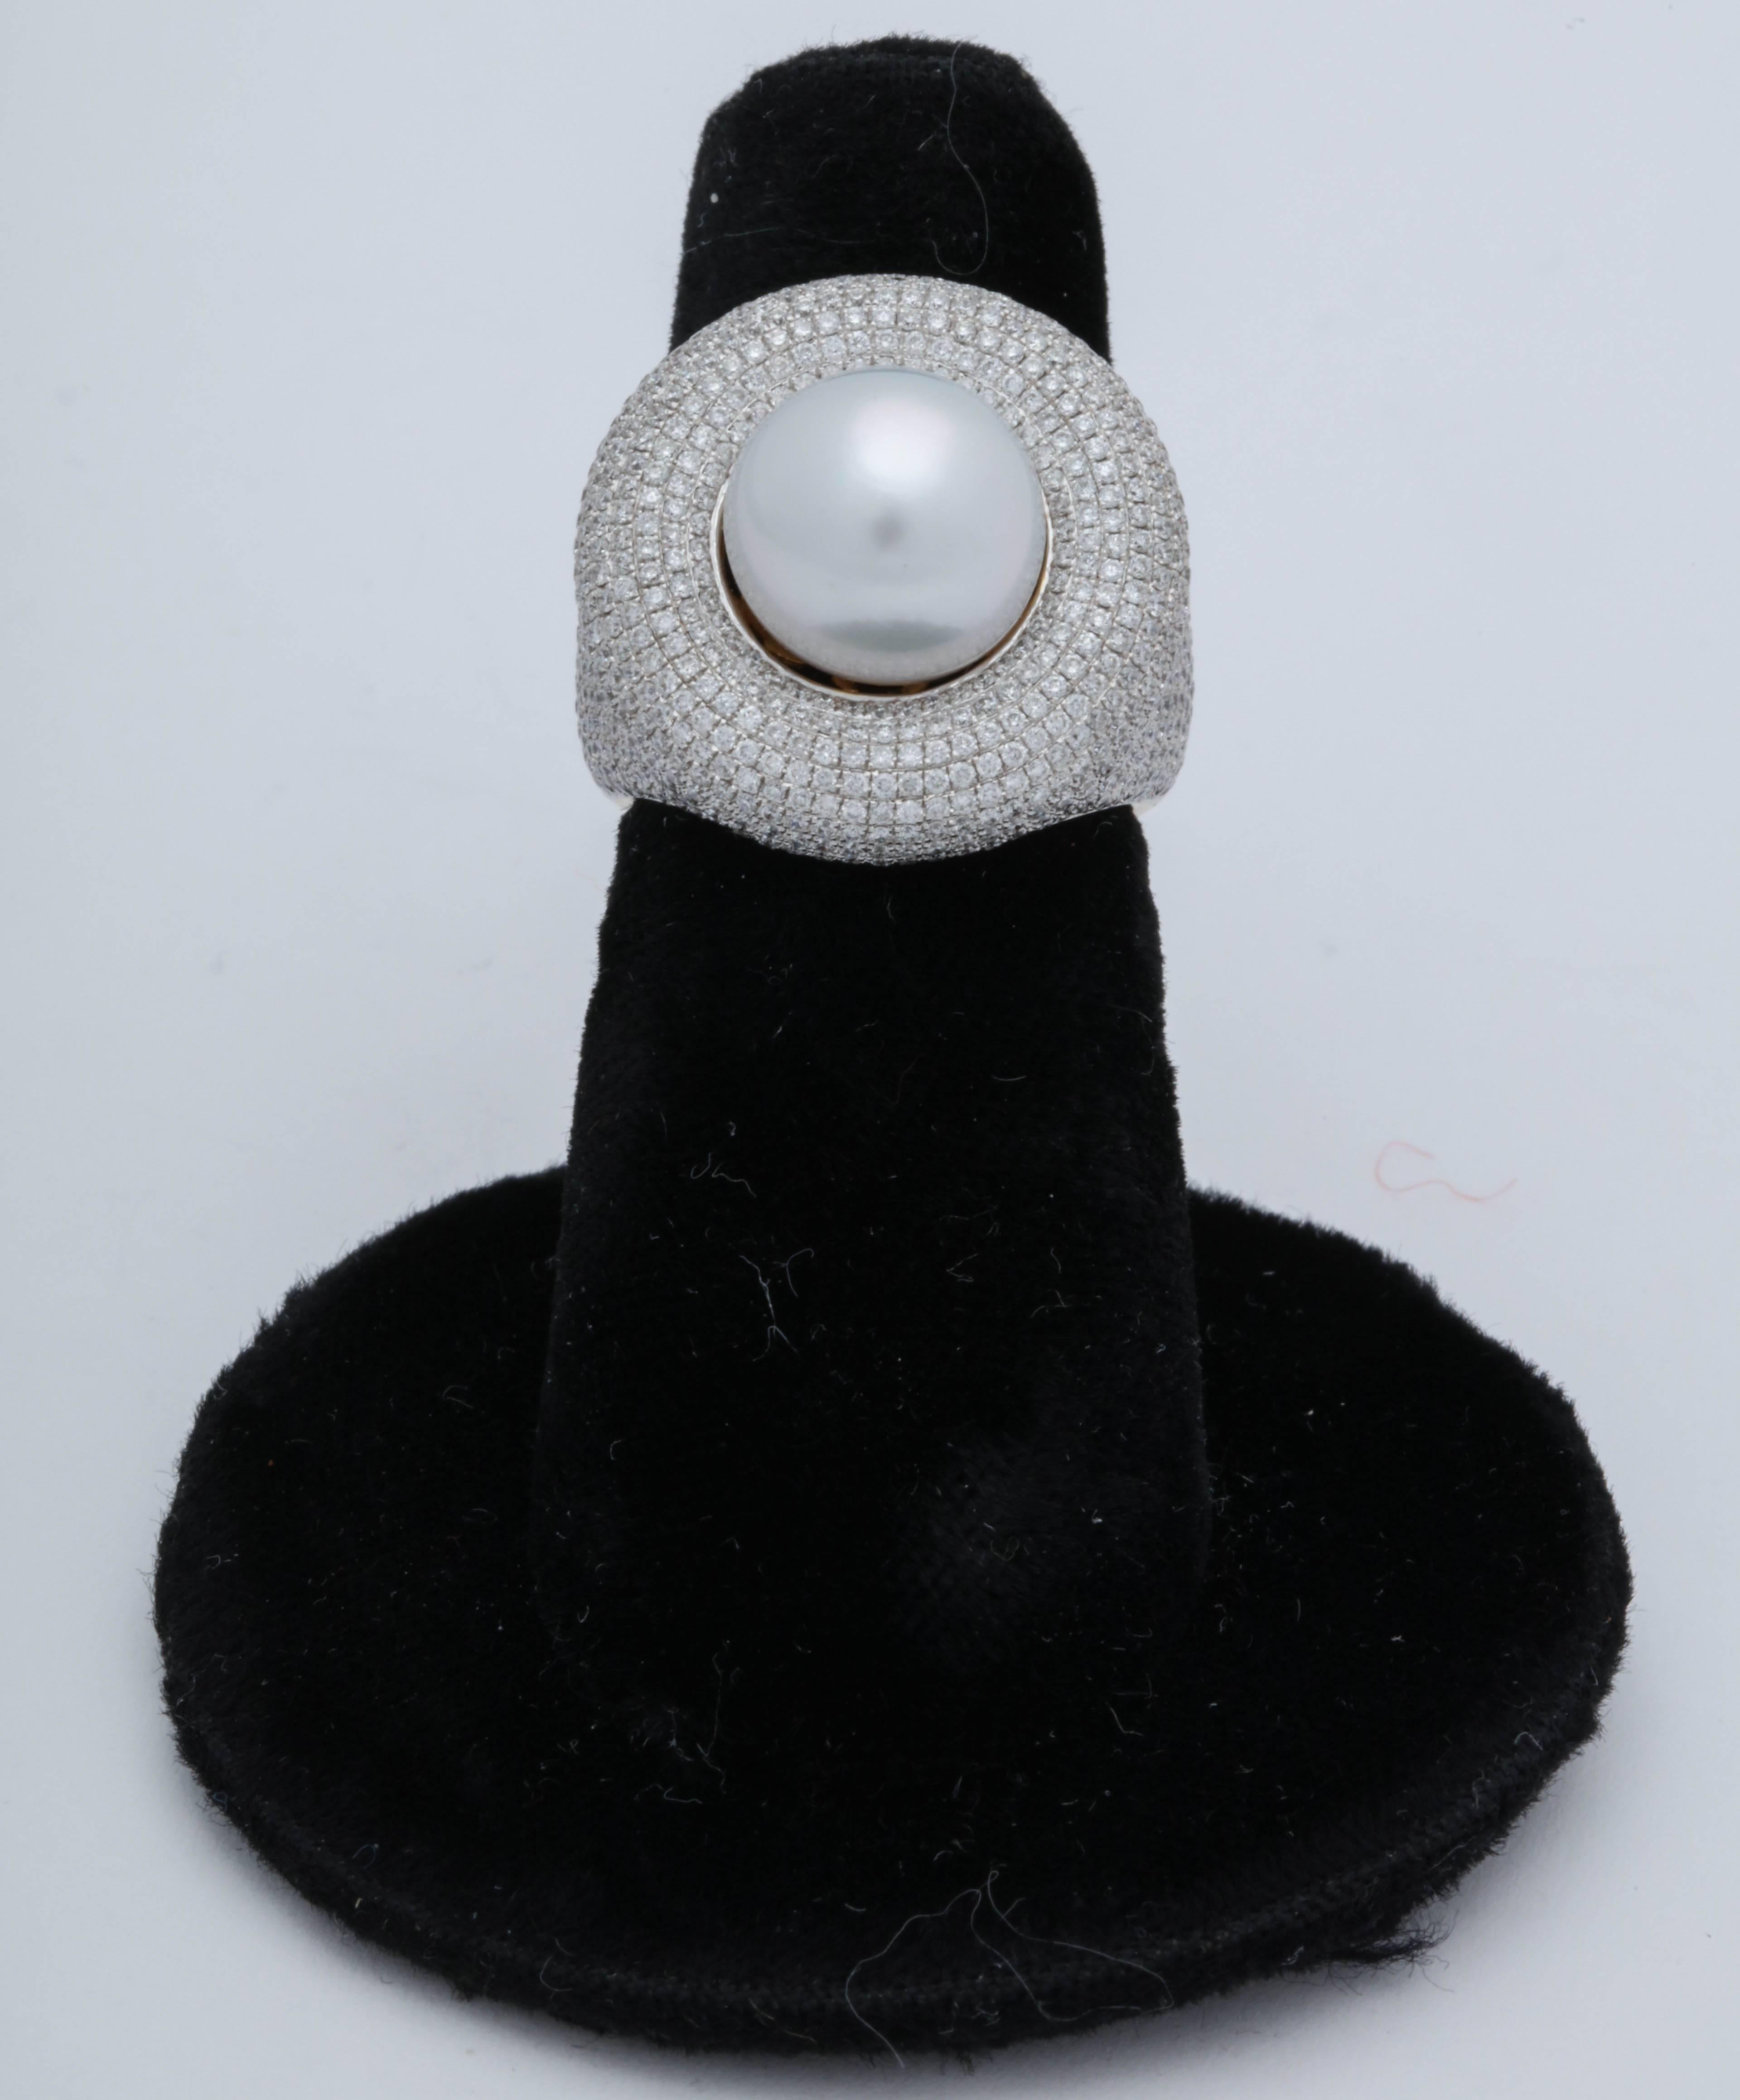 One Ladies 14kt White And Yellow Gold Cocktail Ring Centering A 9MM High Quality And High Luster Cultured Pearl . This Elegant And Ultra Chic Ring Is Also Embellished With Numerous Full Cut diamonds Weighing Approximately 3 Carats Total weight.